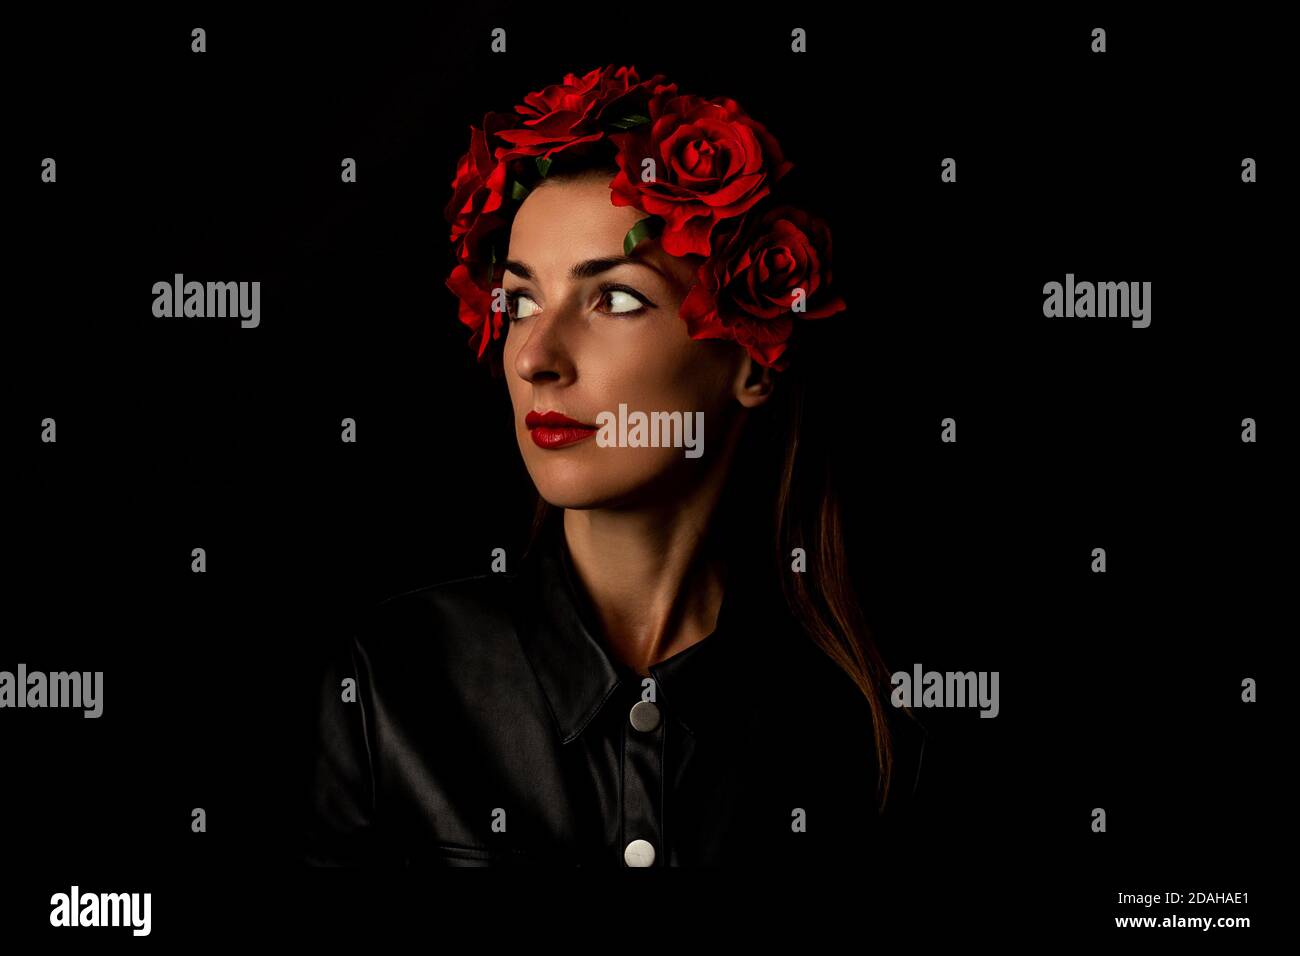 Pensive young woman in wreath of red flowers on black background. Stock Photo